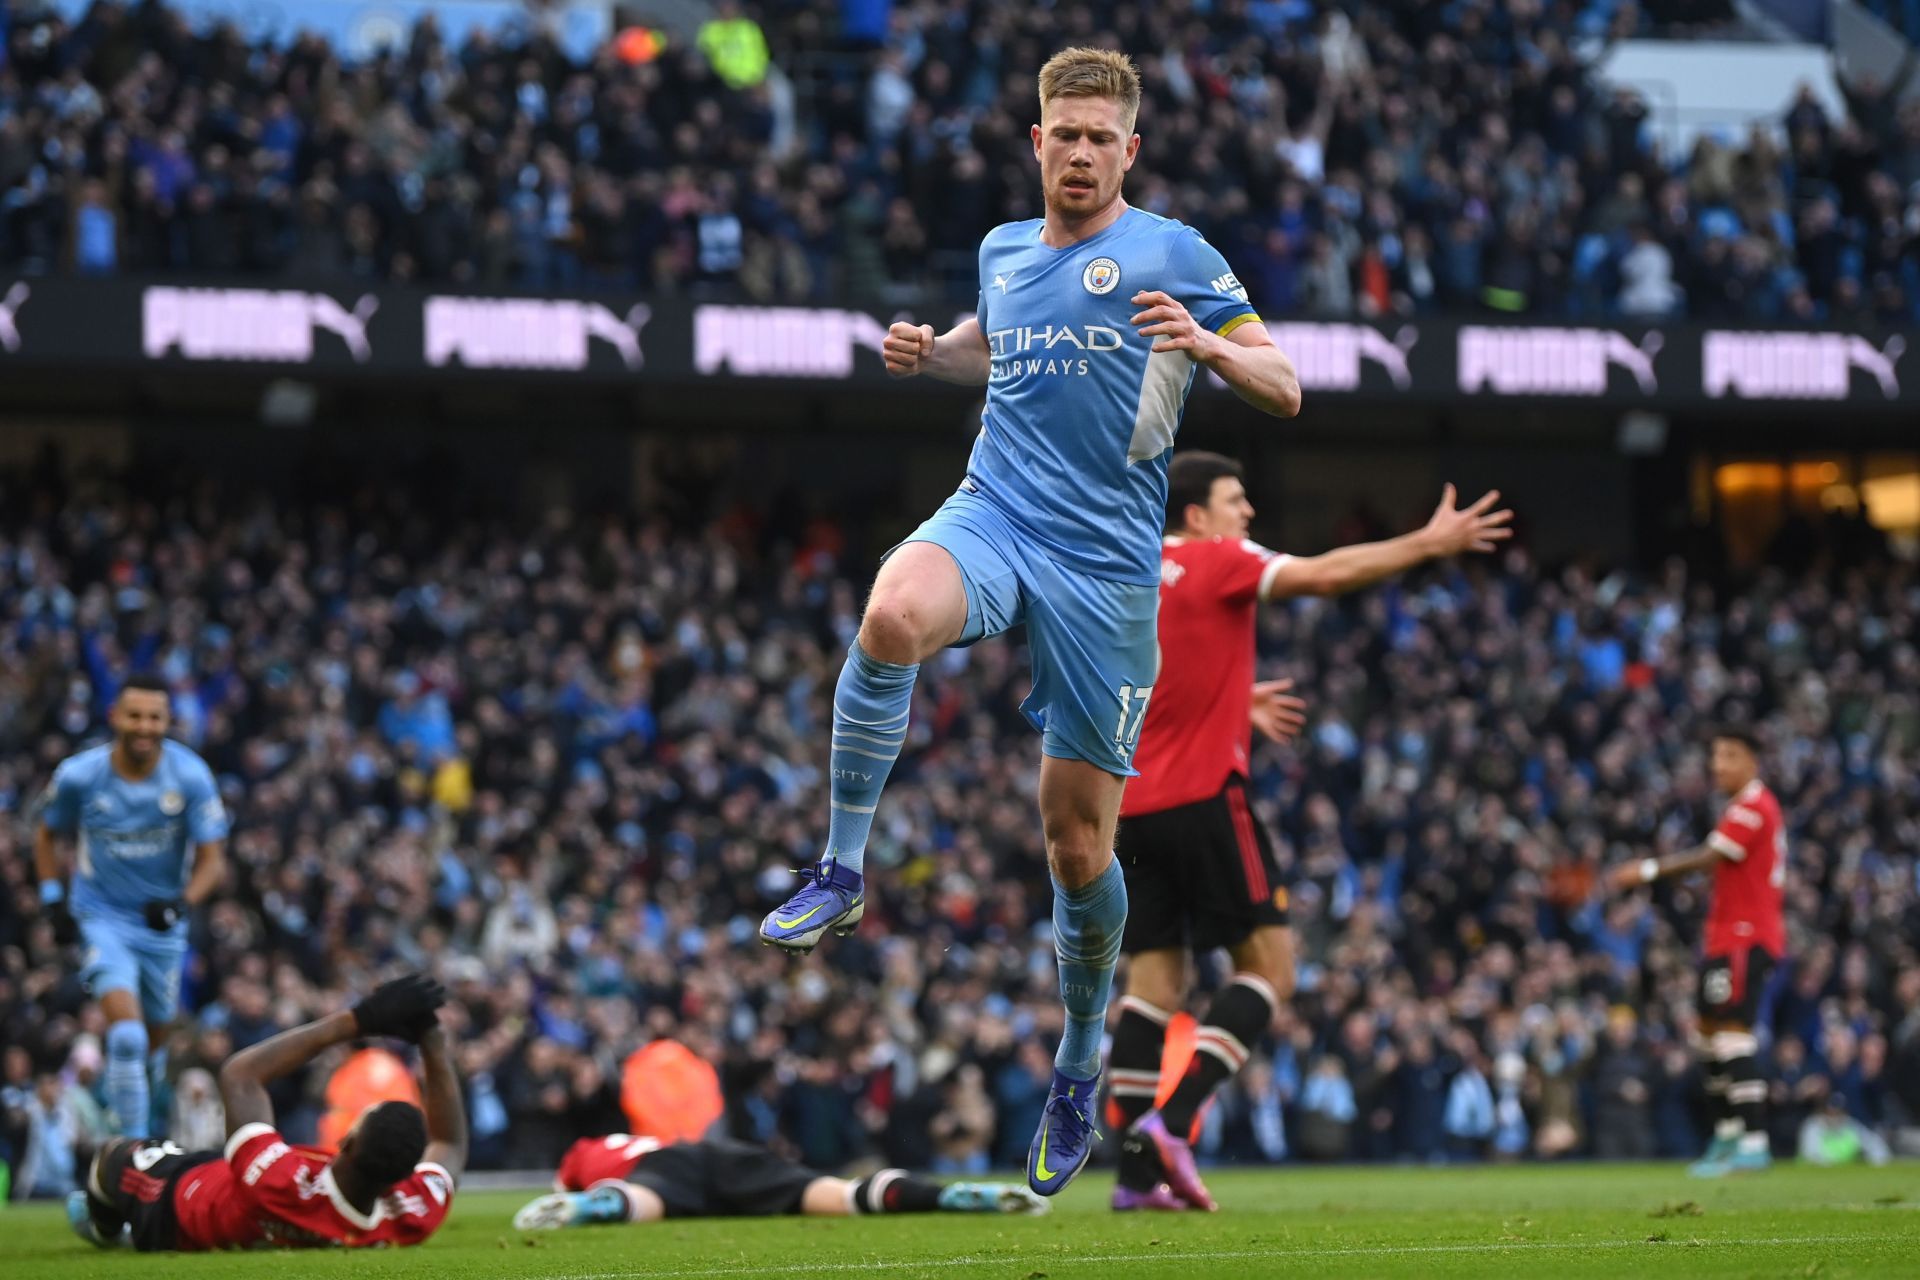 De Bruyne is regarded by many to be the best midfielder of this generation